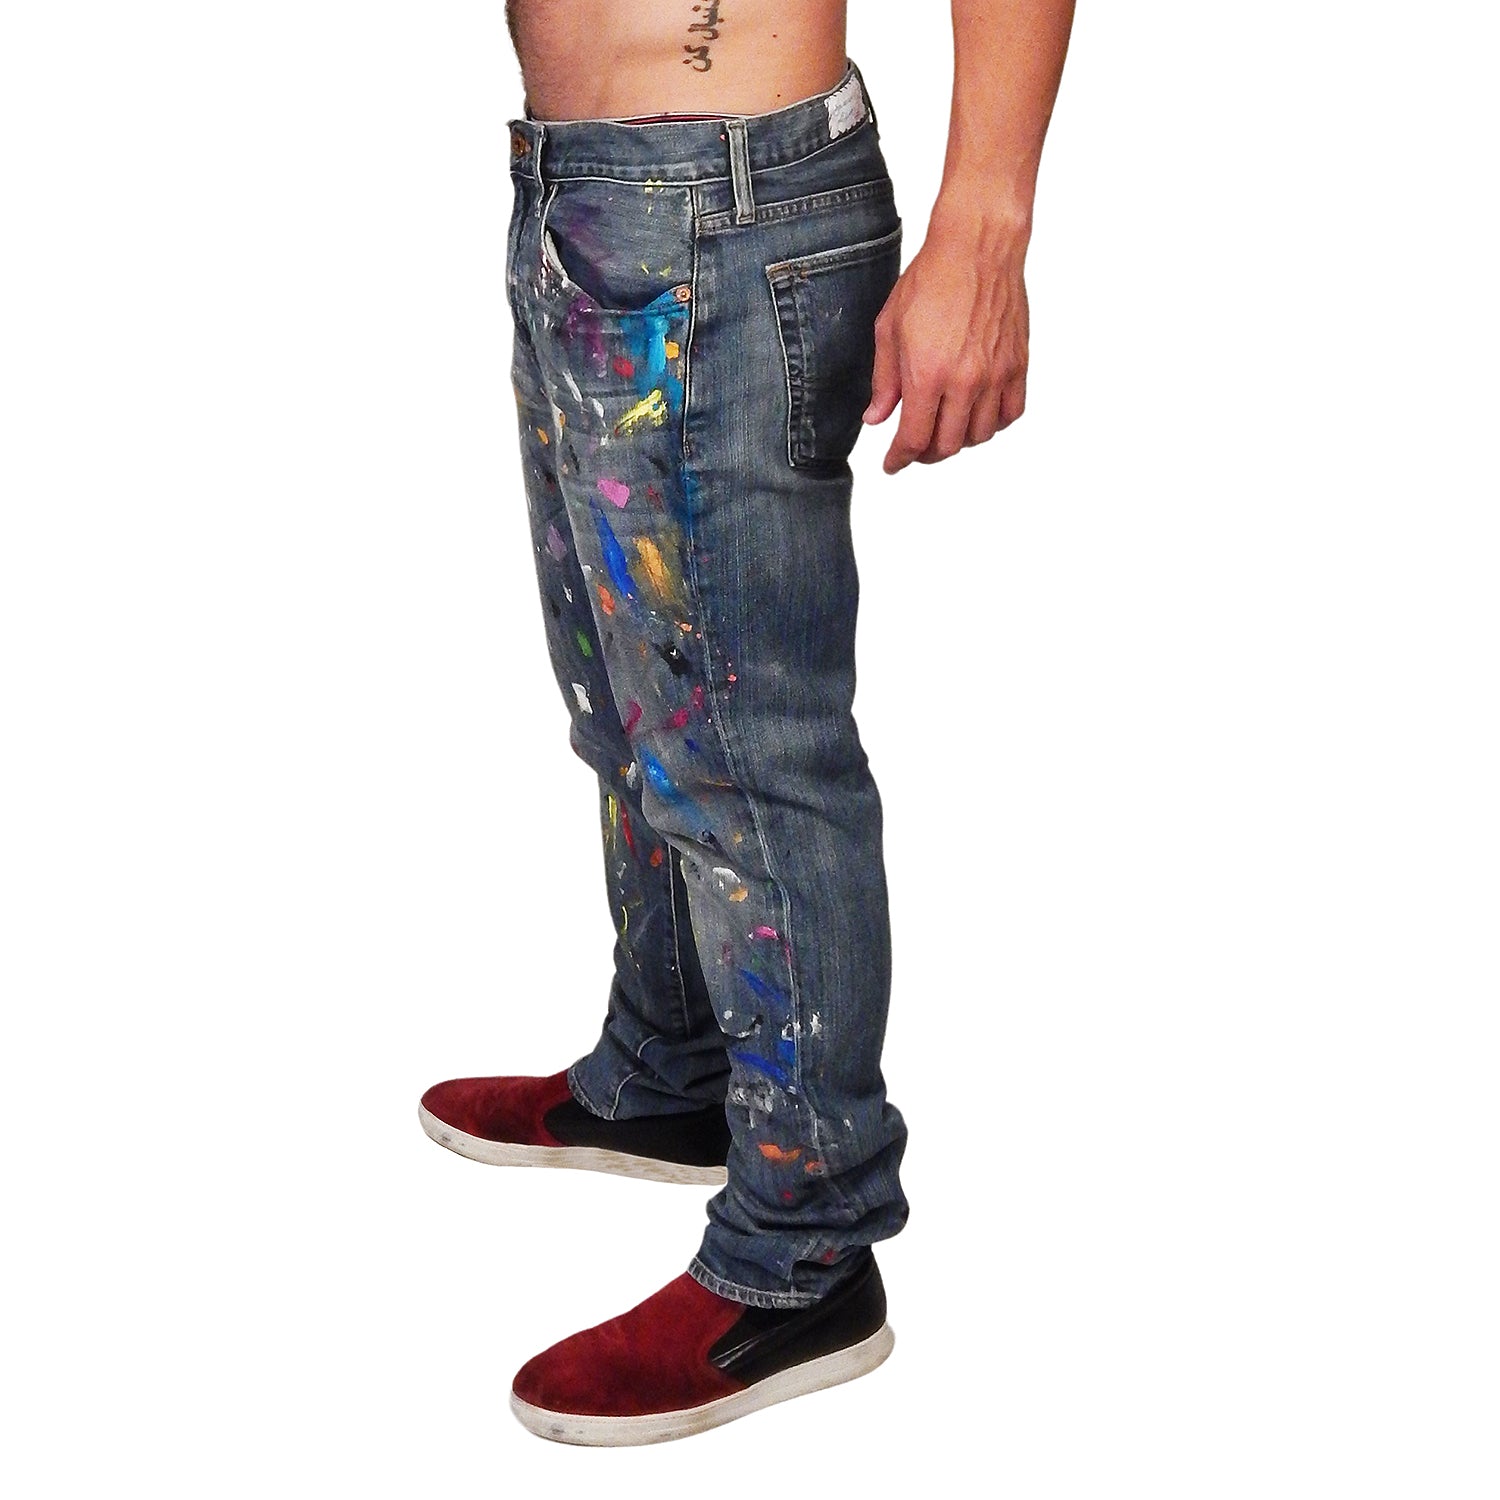 DAMIAN ELWES - &quot;Number 117&quot; - Hand Painted Jeans by Damian Elwes